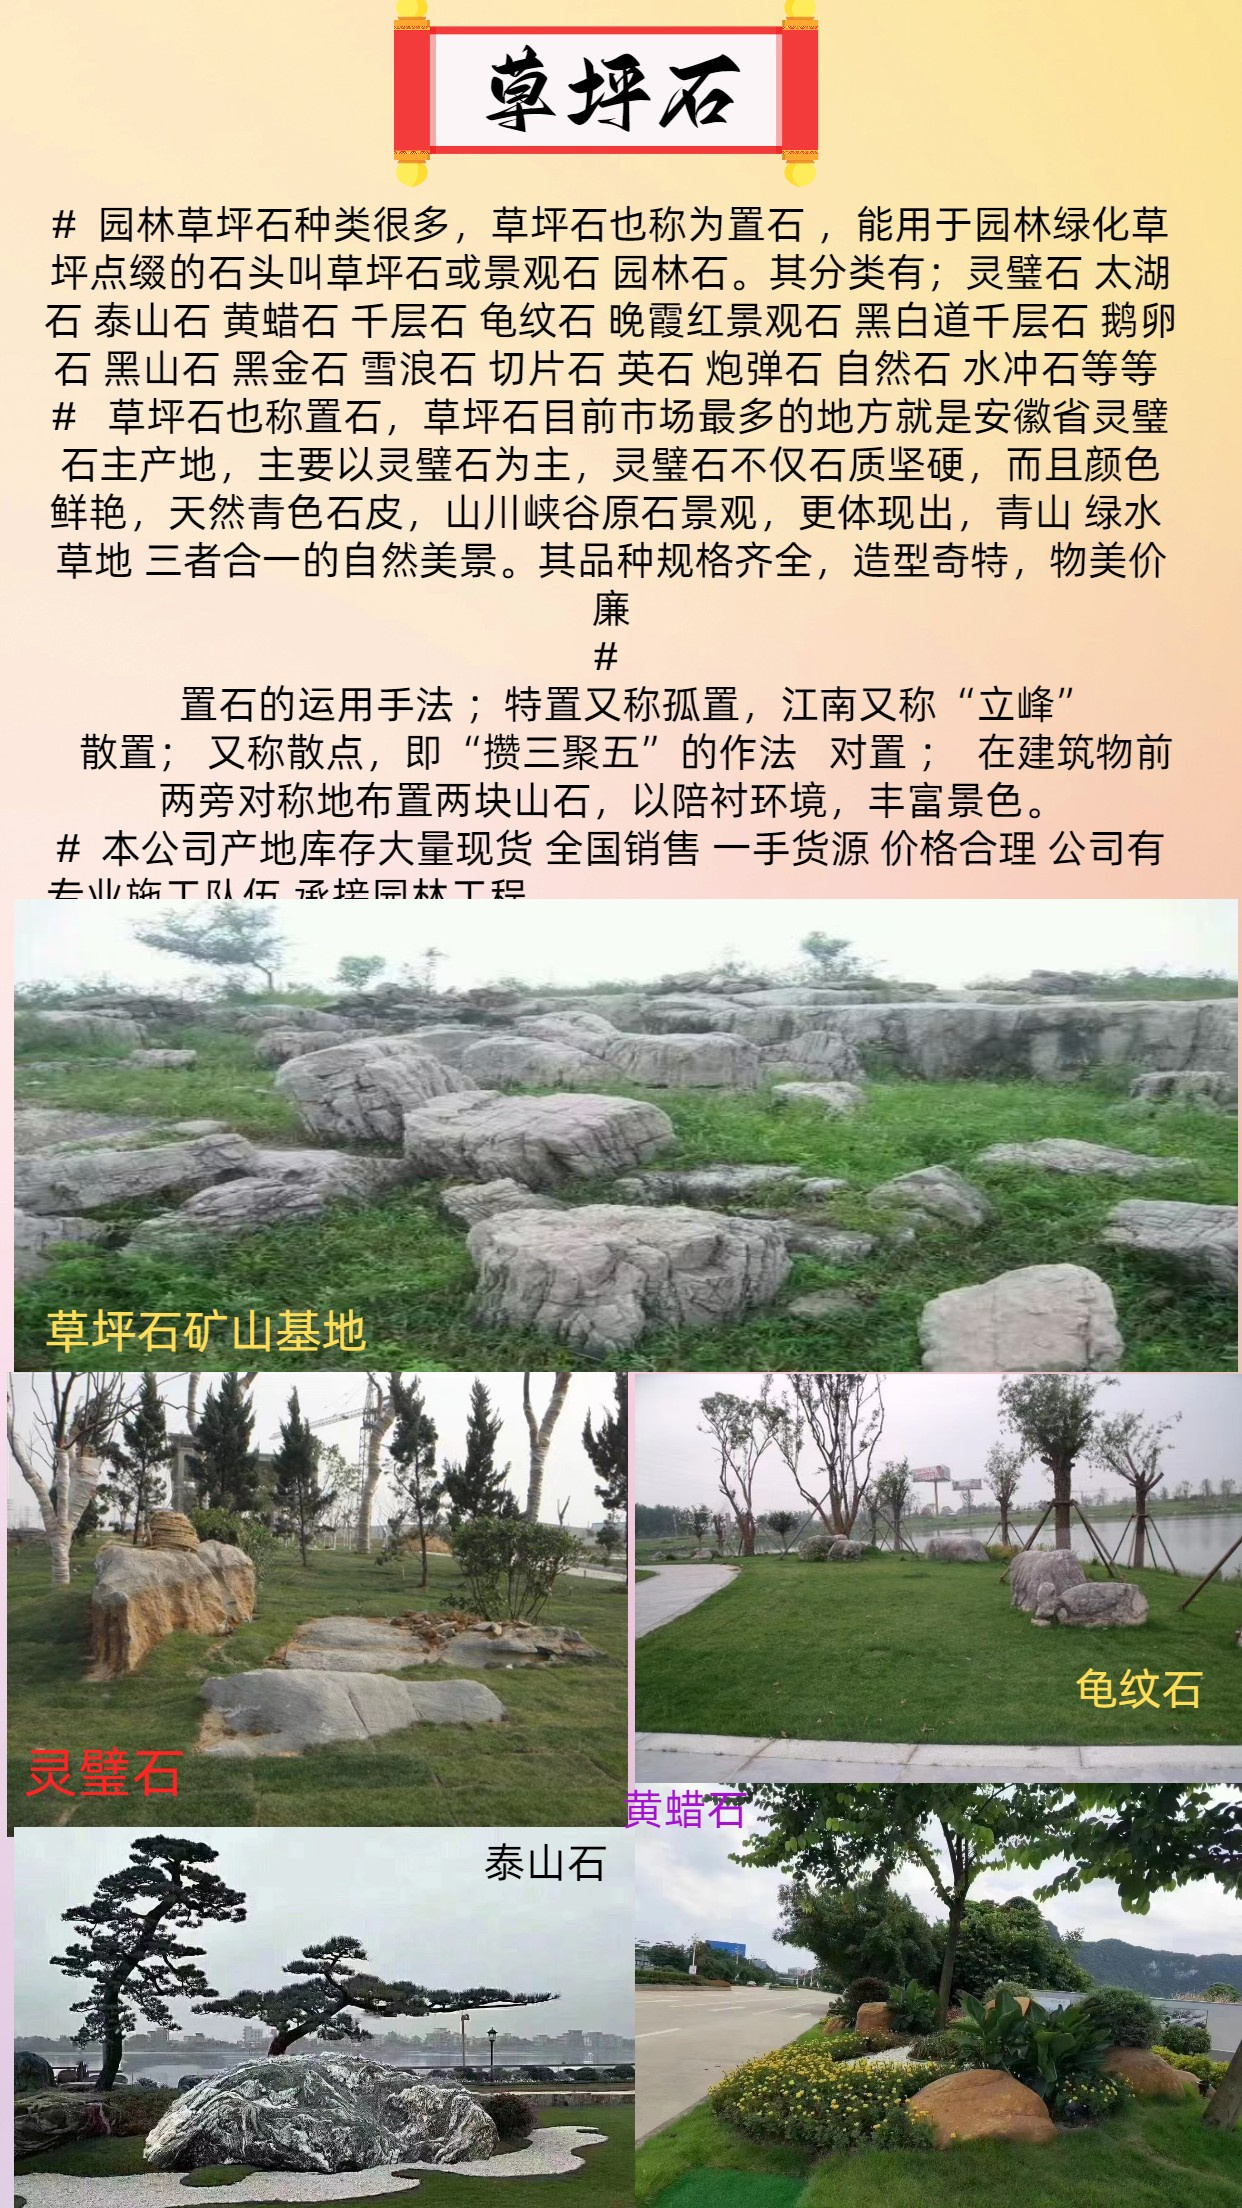 Adequate supply of natural Lingbi stone for garden landscape lawn stone, natural garden stone landscape stone